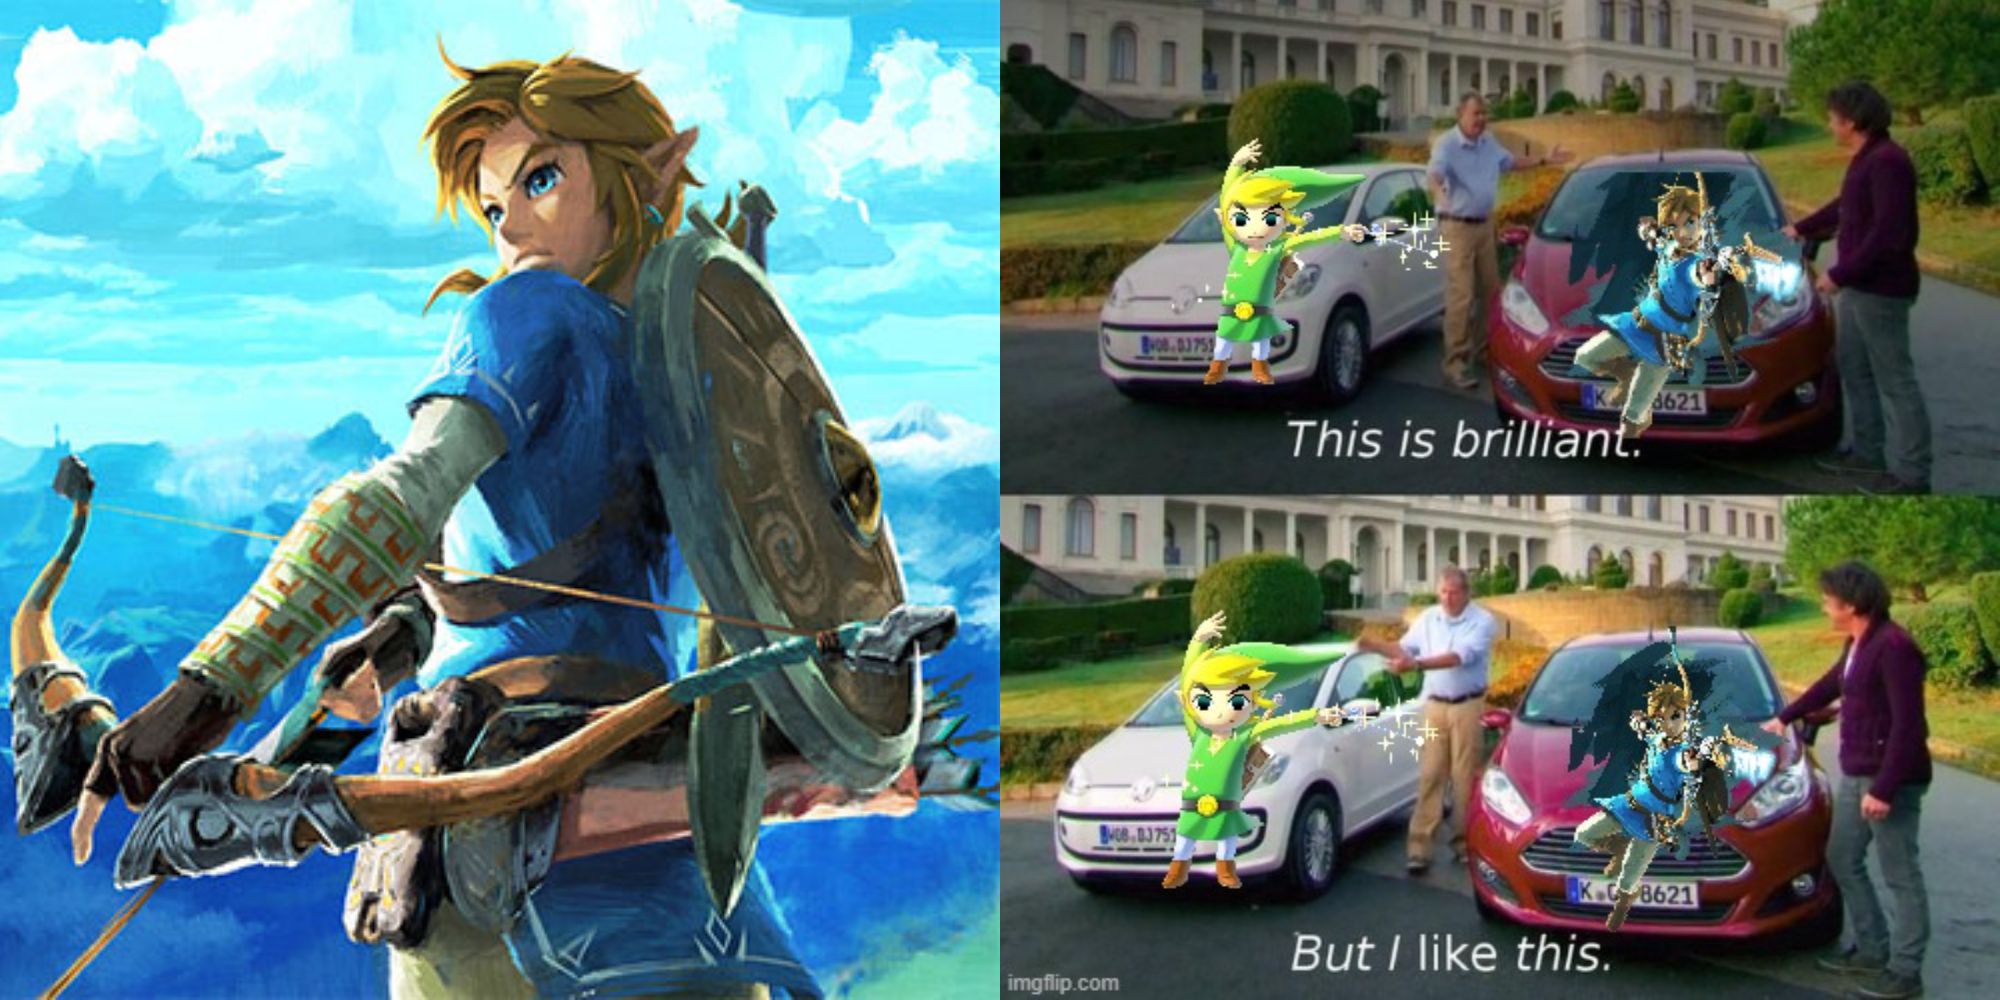 15 Hilarious The Legend of Zelda Memes That Will Make You LOL